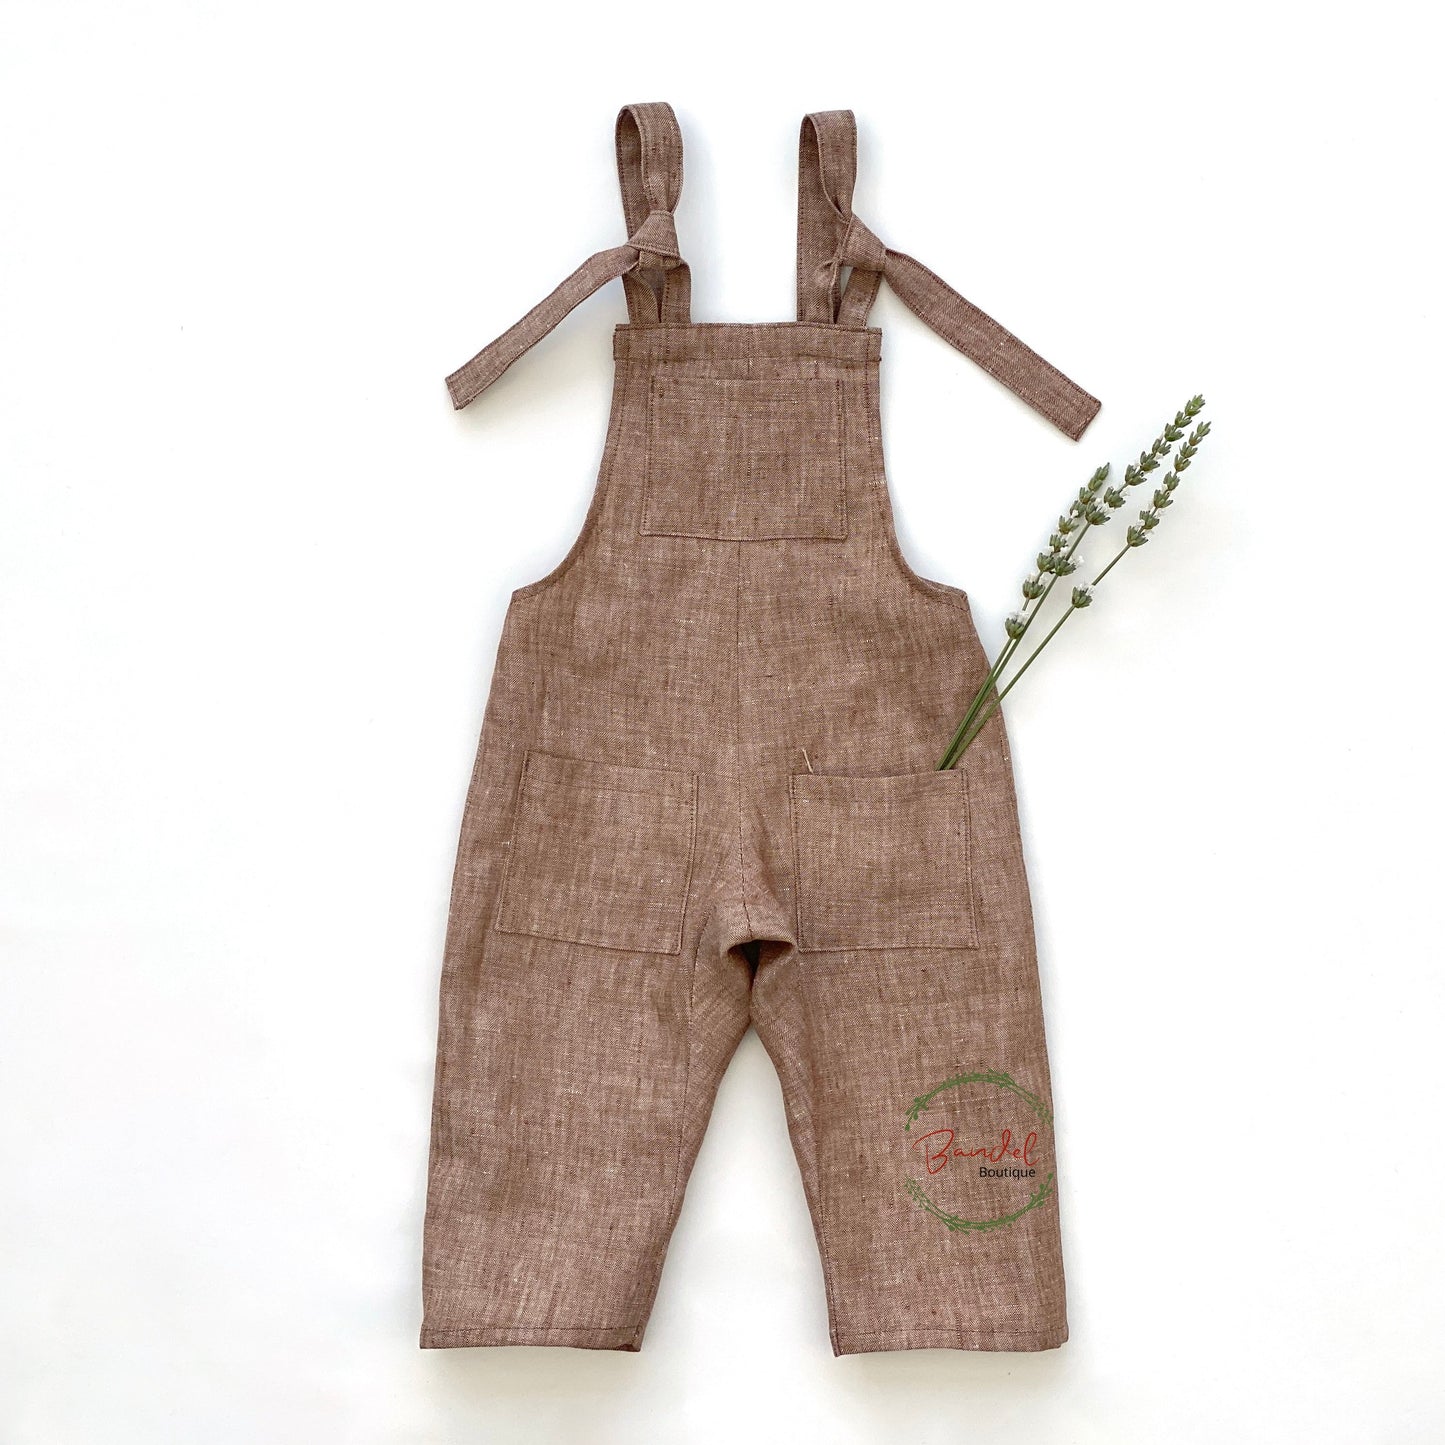 Brown Linen Dungarees are crafted from pure linen fabric to create a comfortable and sustainable pieace for your little one. The adjustable tie straps and three front pockets complete the relaxed fit for a versatile wardrobe essential.